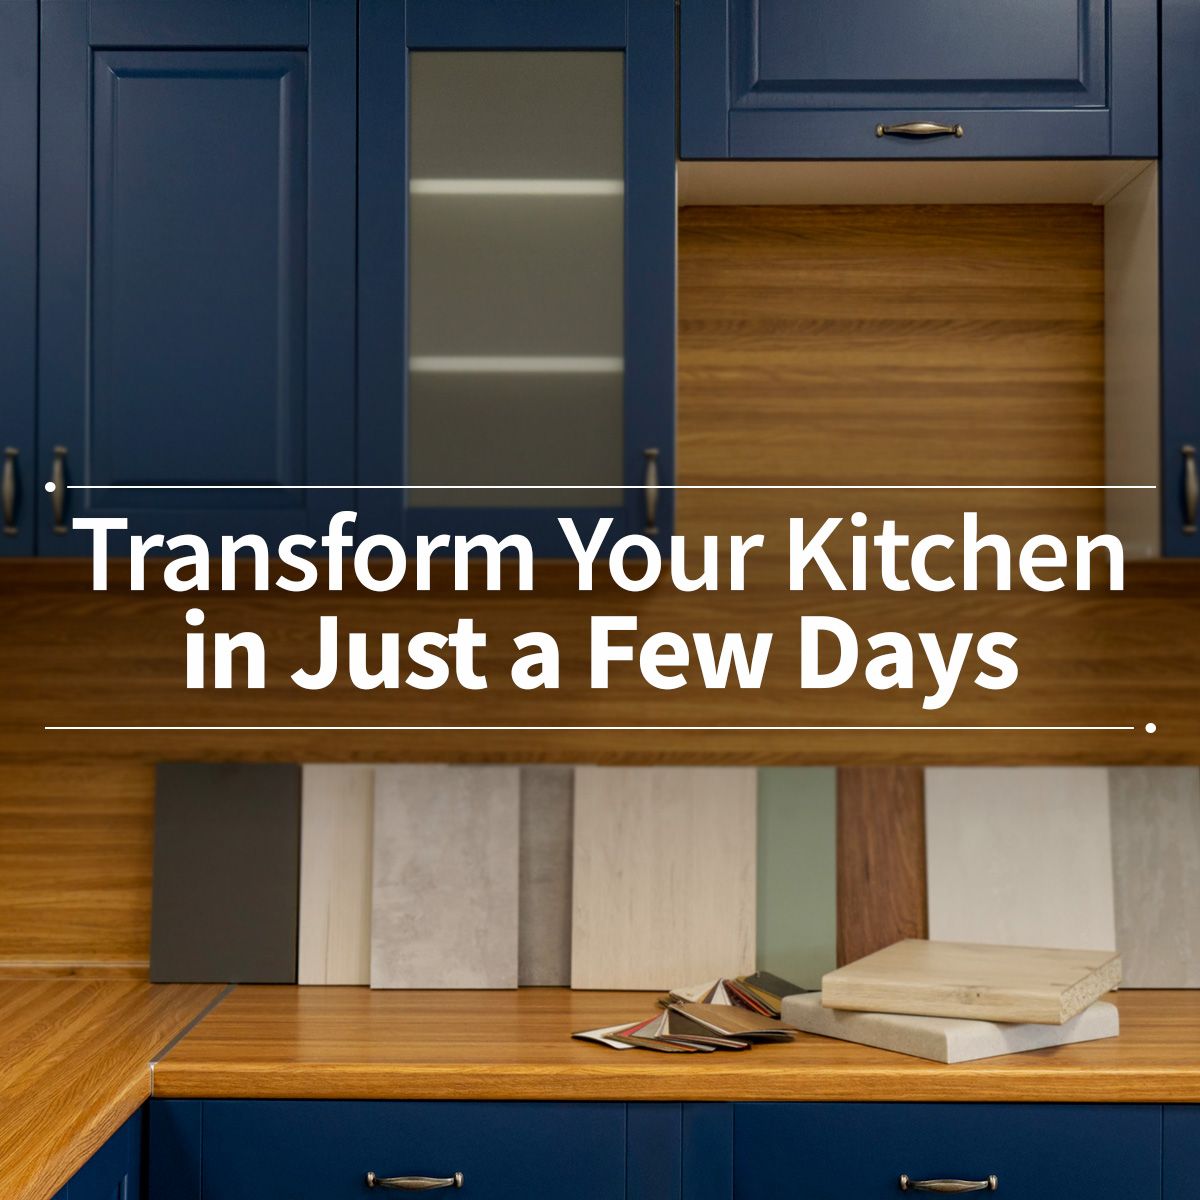 Transform Your Kitchen in Just a Few Days